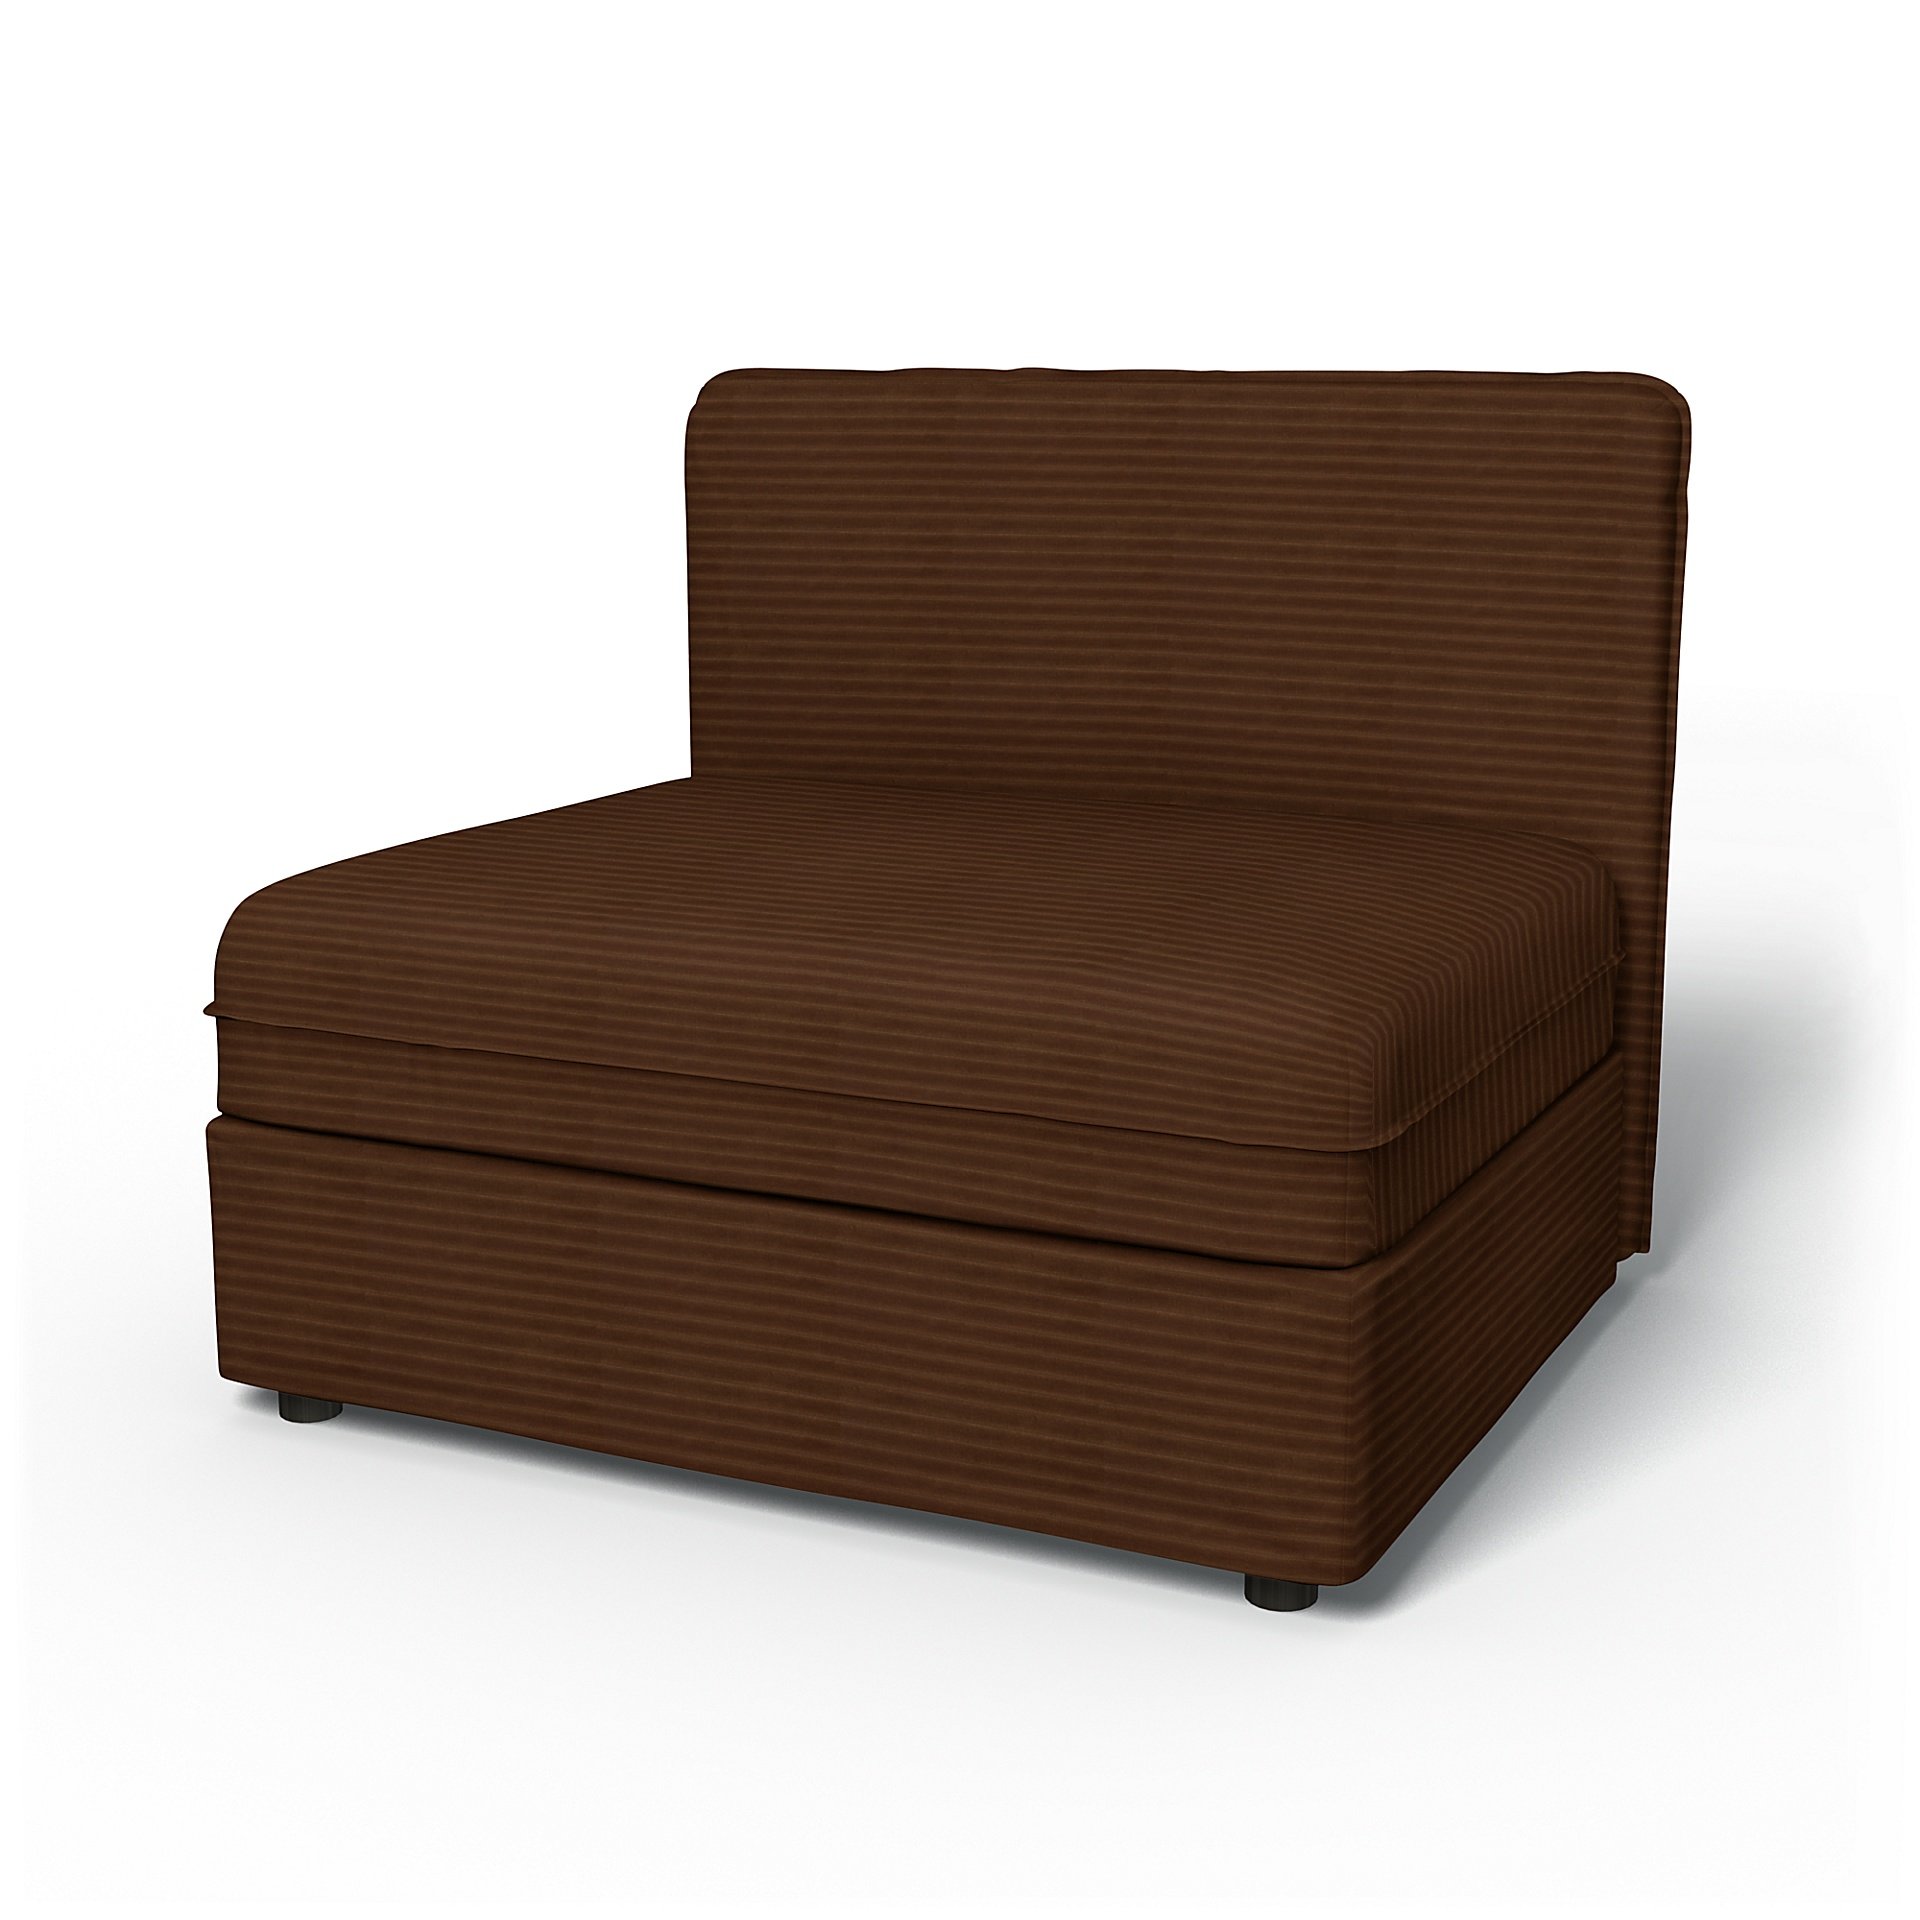 IKEA - Vallentuna Seat Module with Low Back Cover 100x80cm 39x32in, Chocolate Brown, Corduroy - Bemz